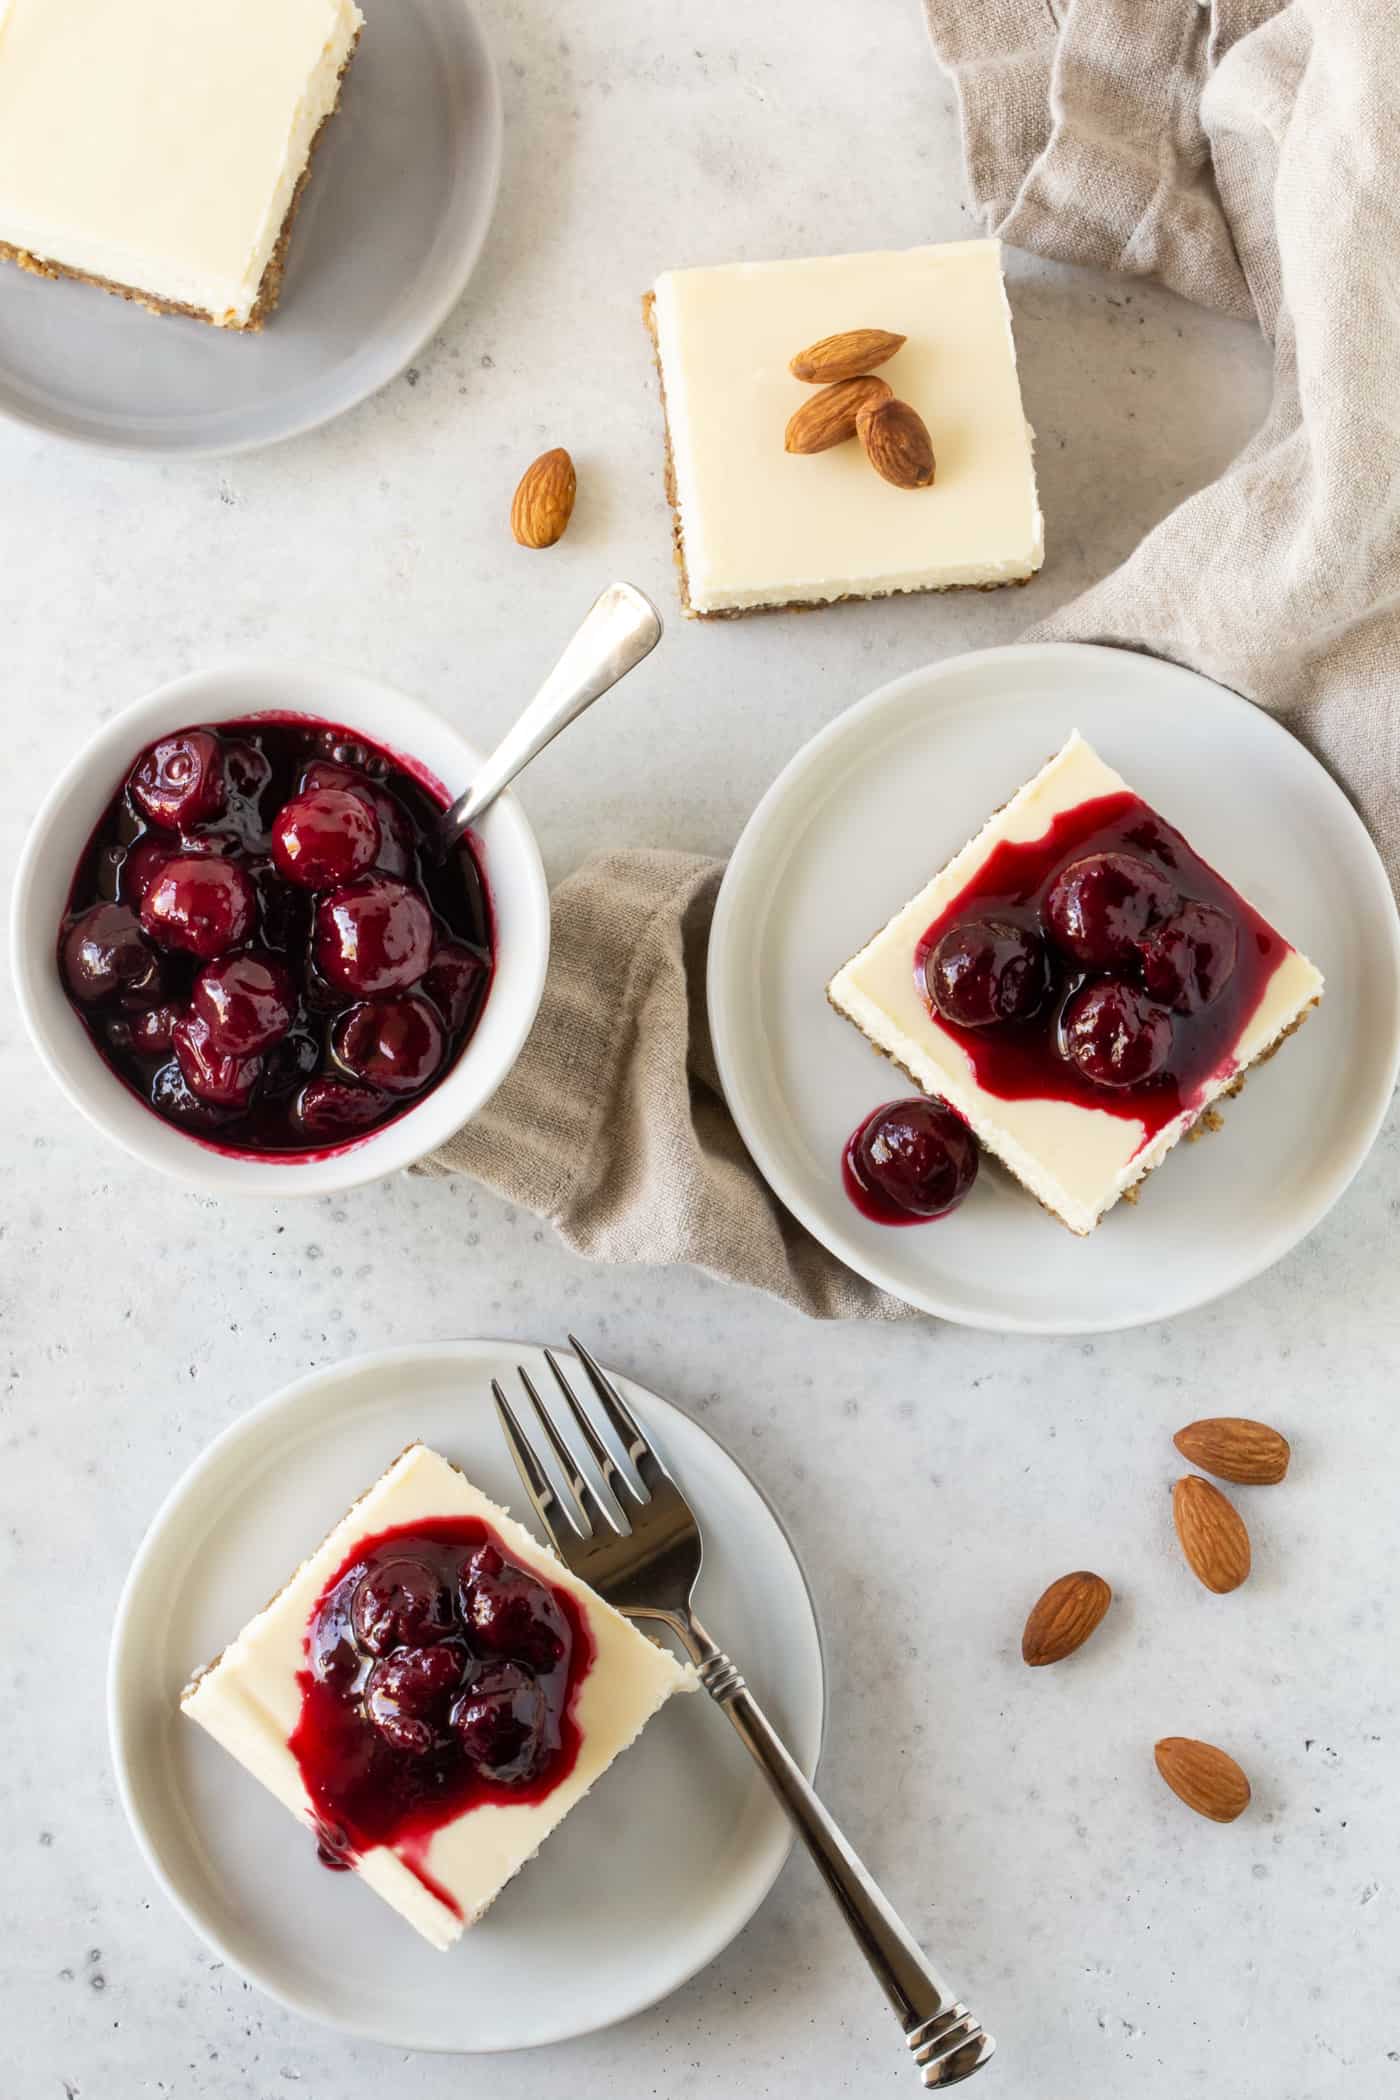 Small dessert plates filled with slices of Gluten-Free Cherry Almond Cheesecake Bars.